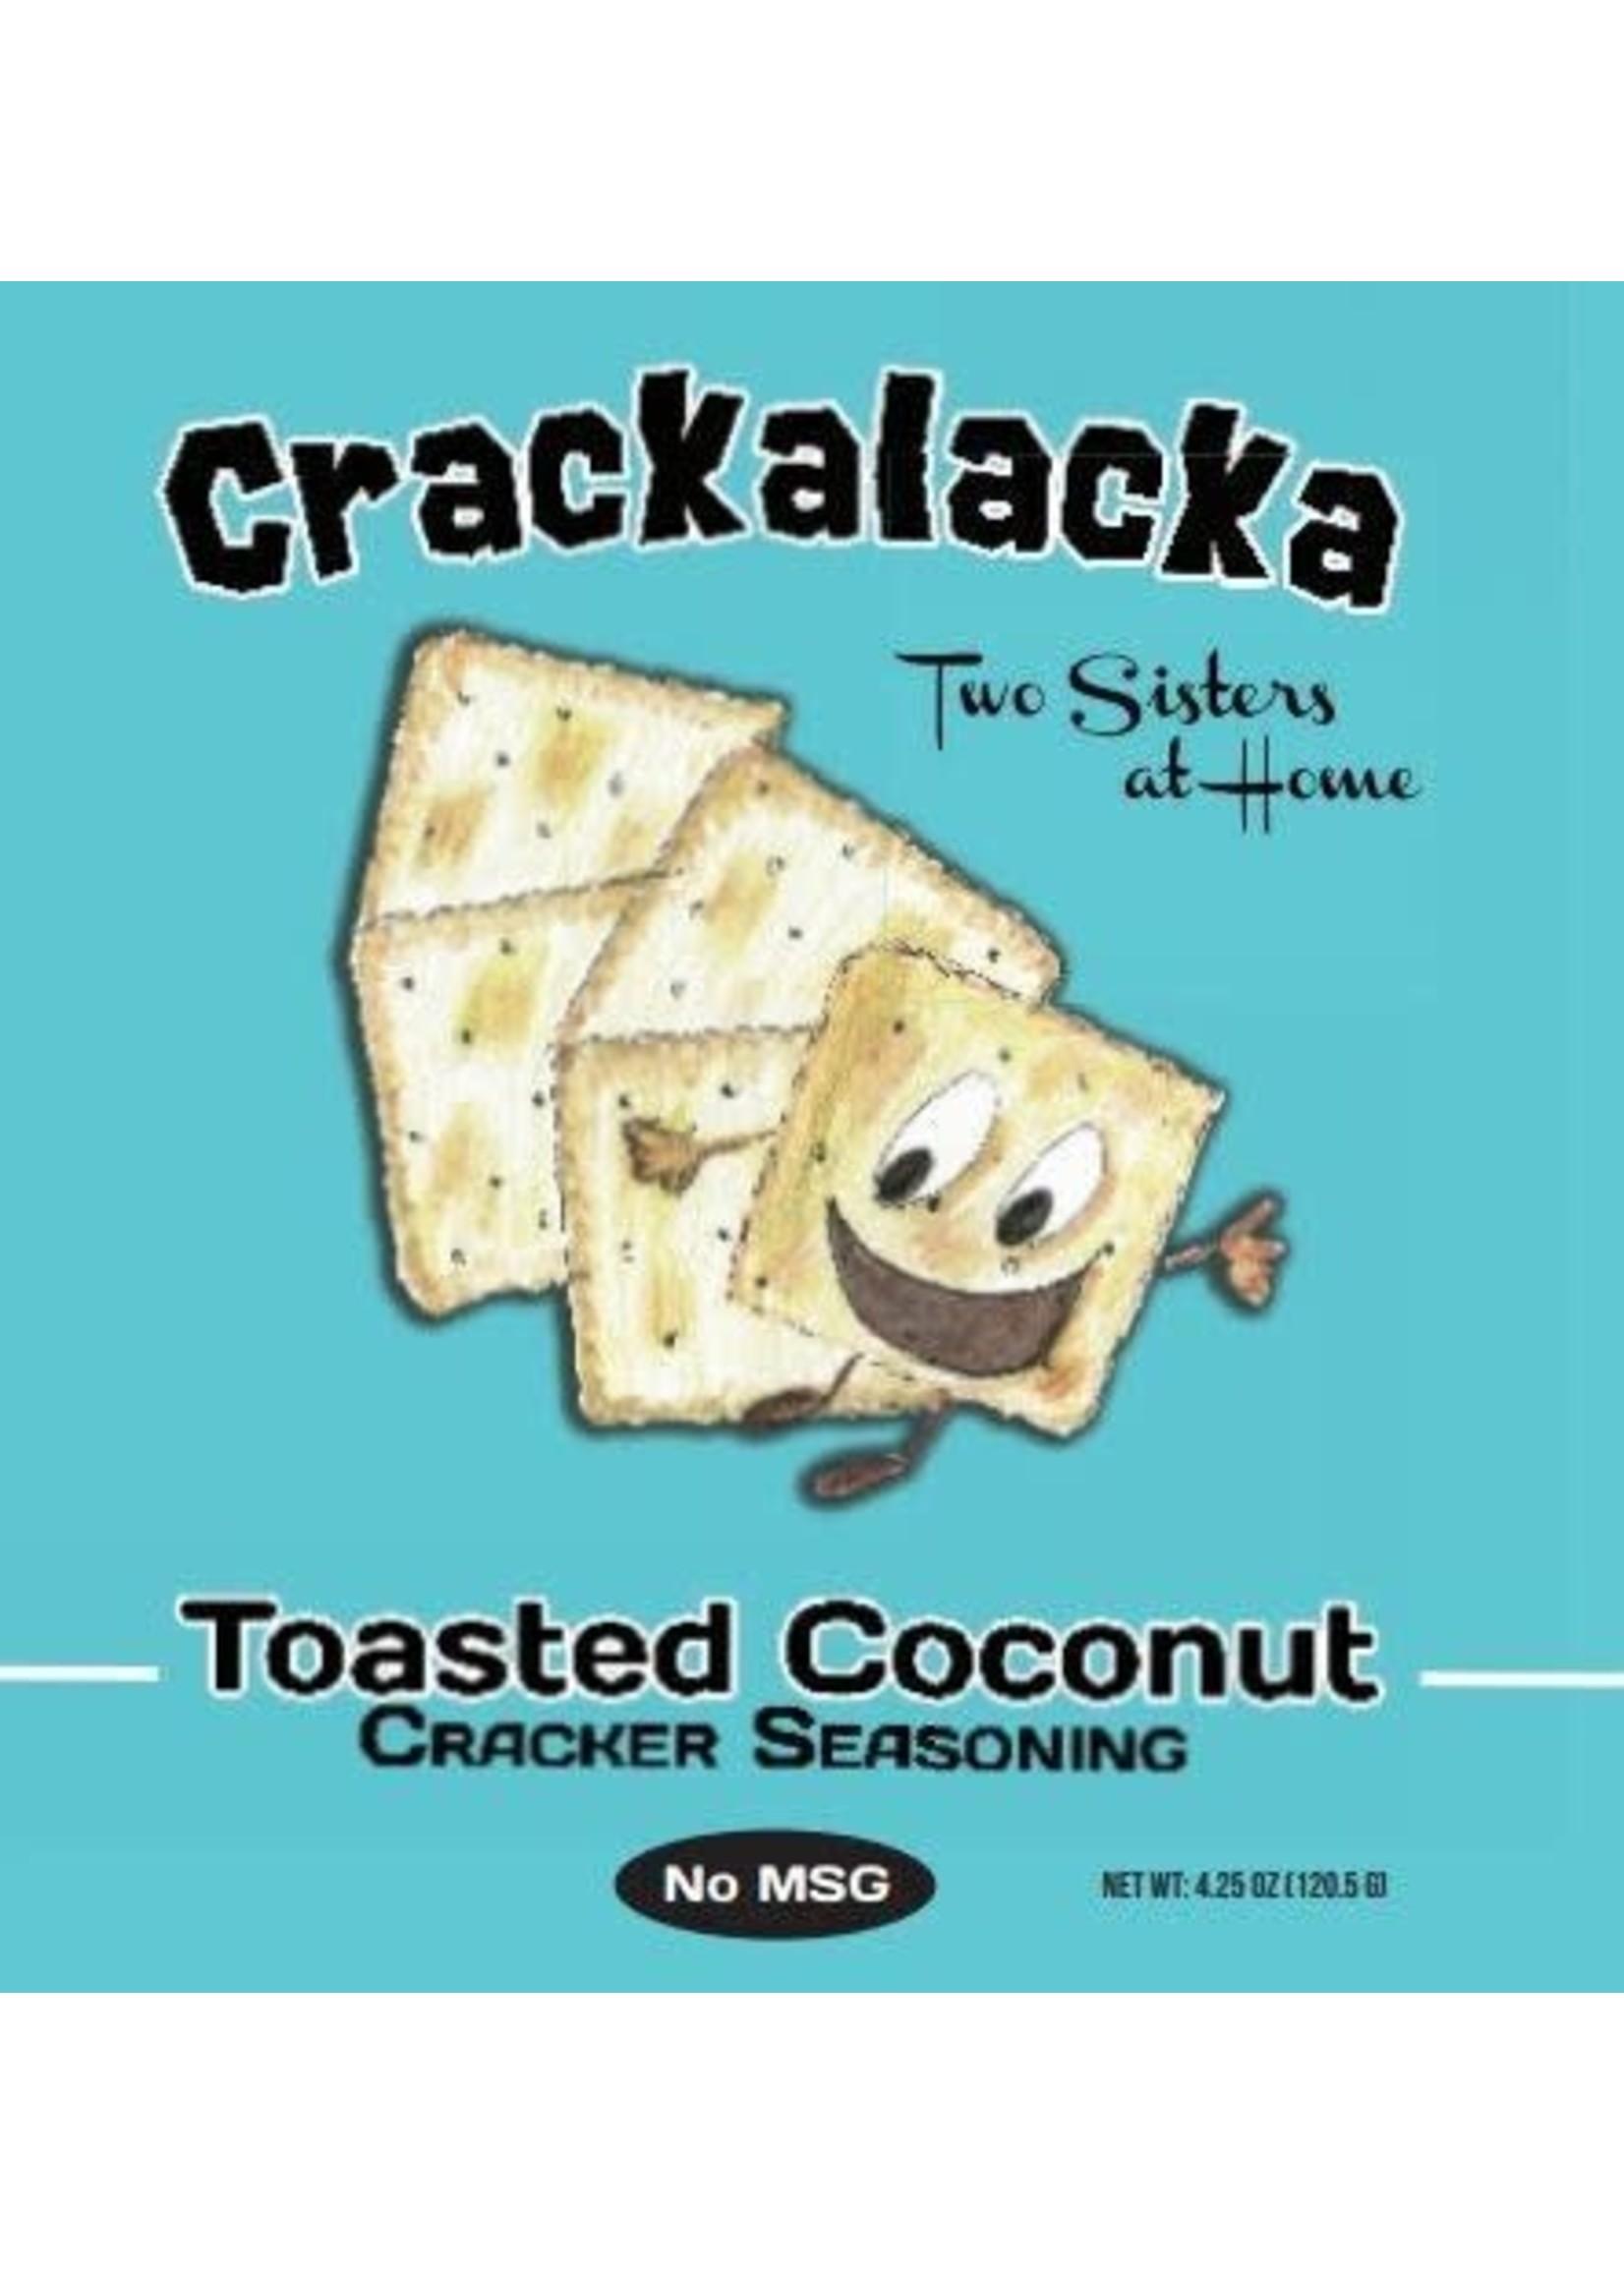 Two Sisters at Home Toasted Coconut Cracker Seasoning